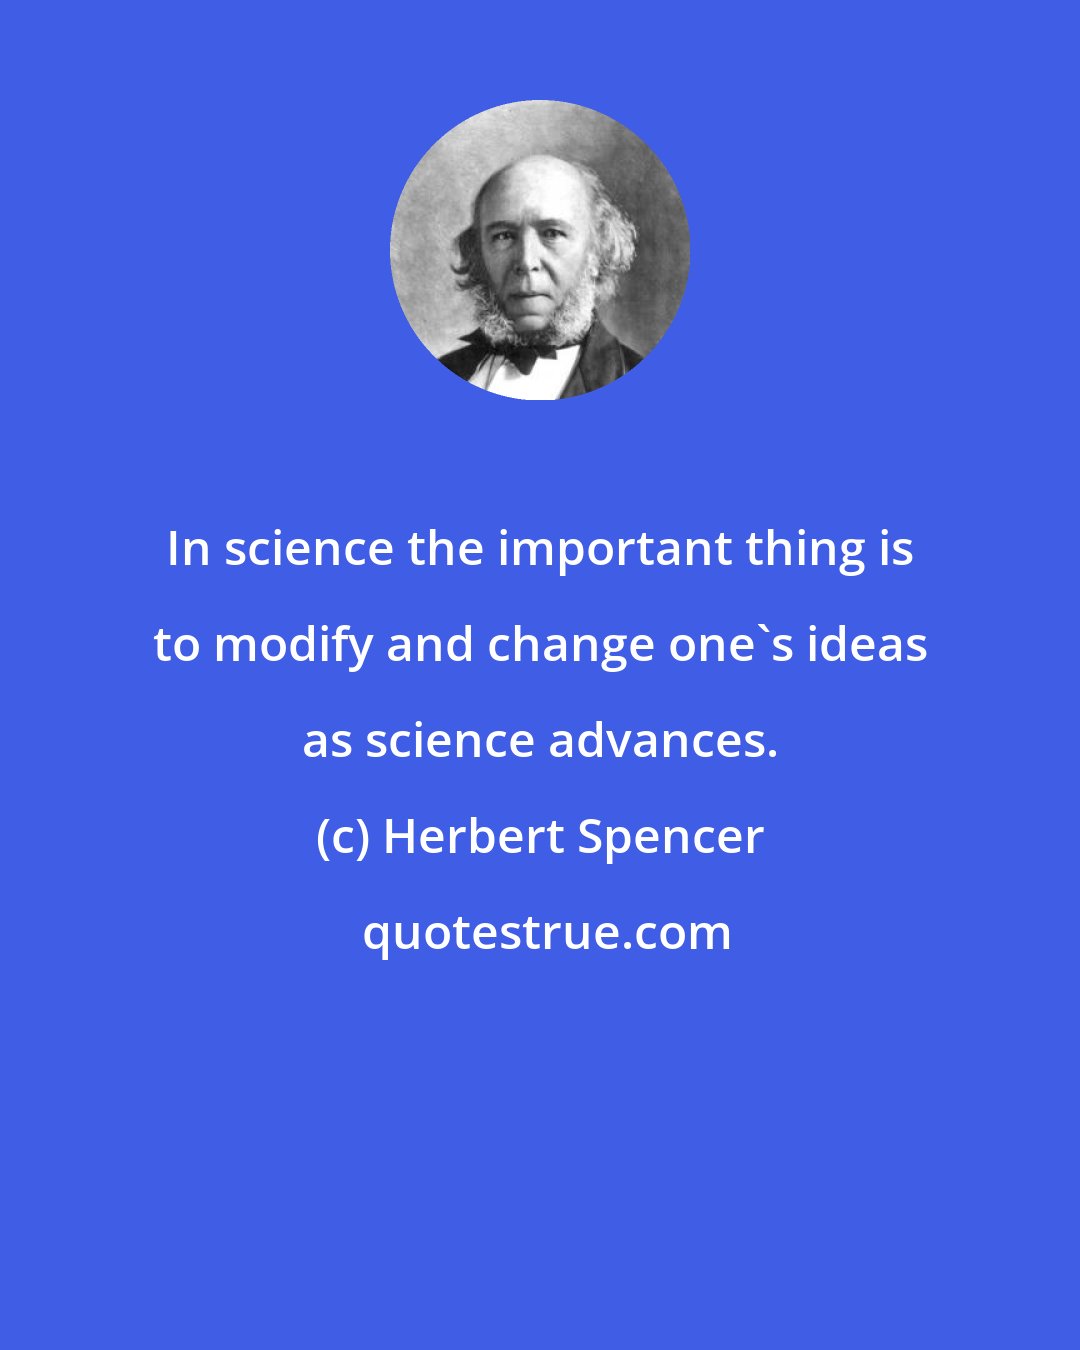 Herbert Spencer: In science the important thing is to modify and change one's ideas as science advances.